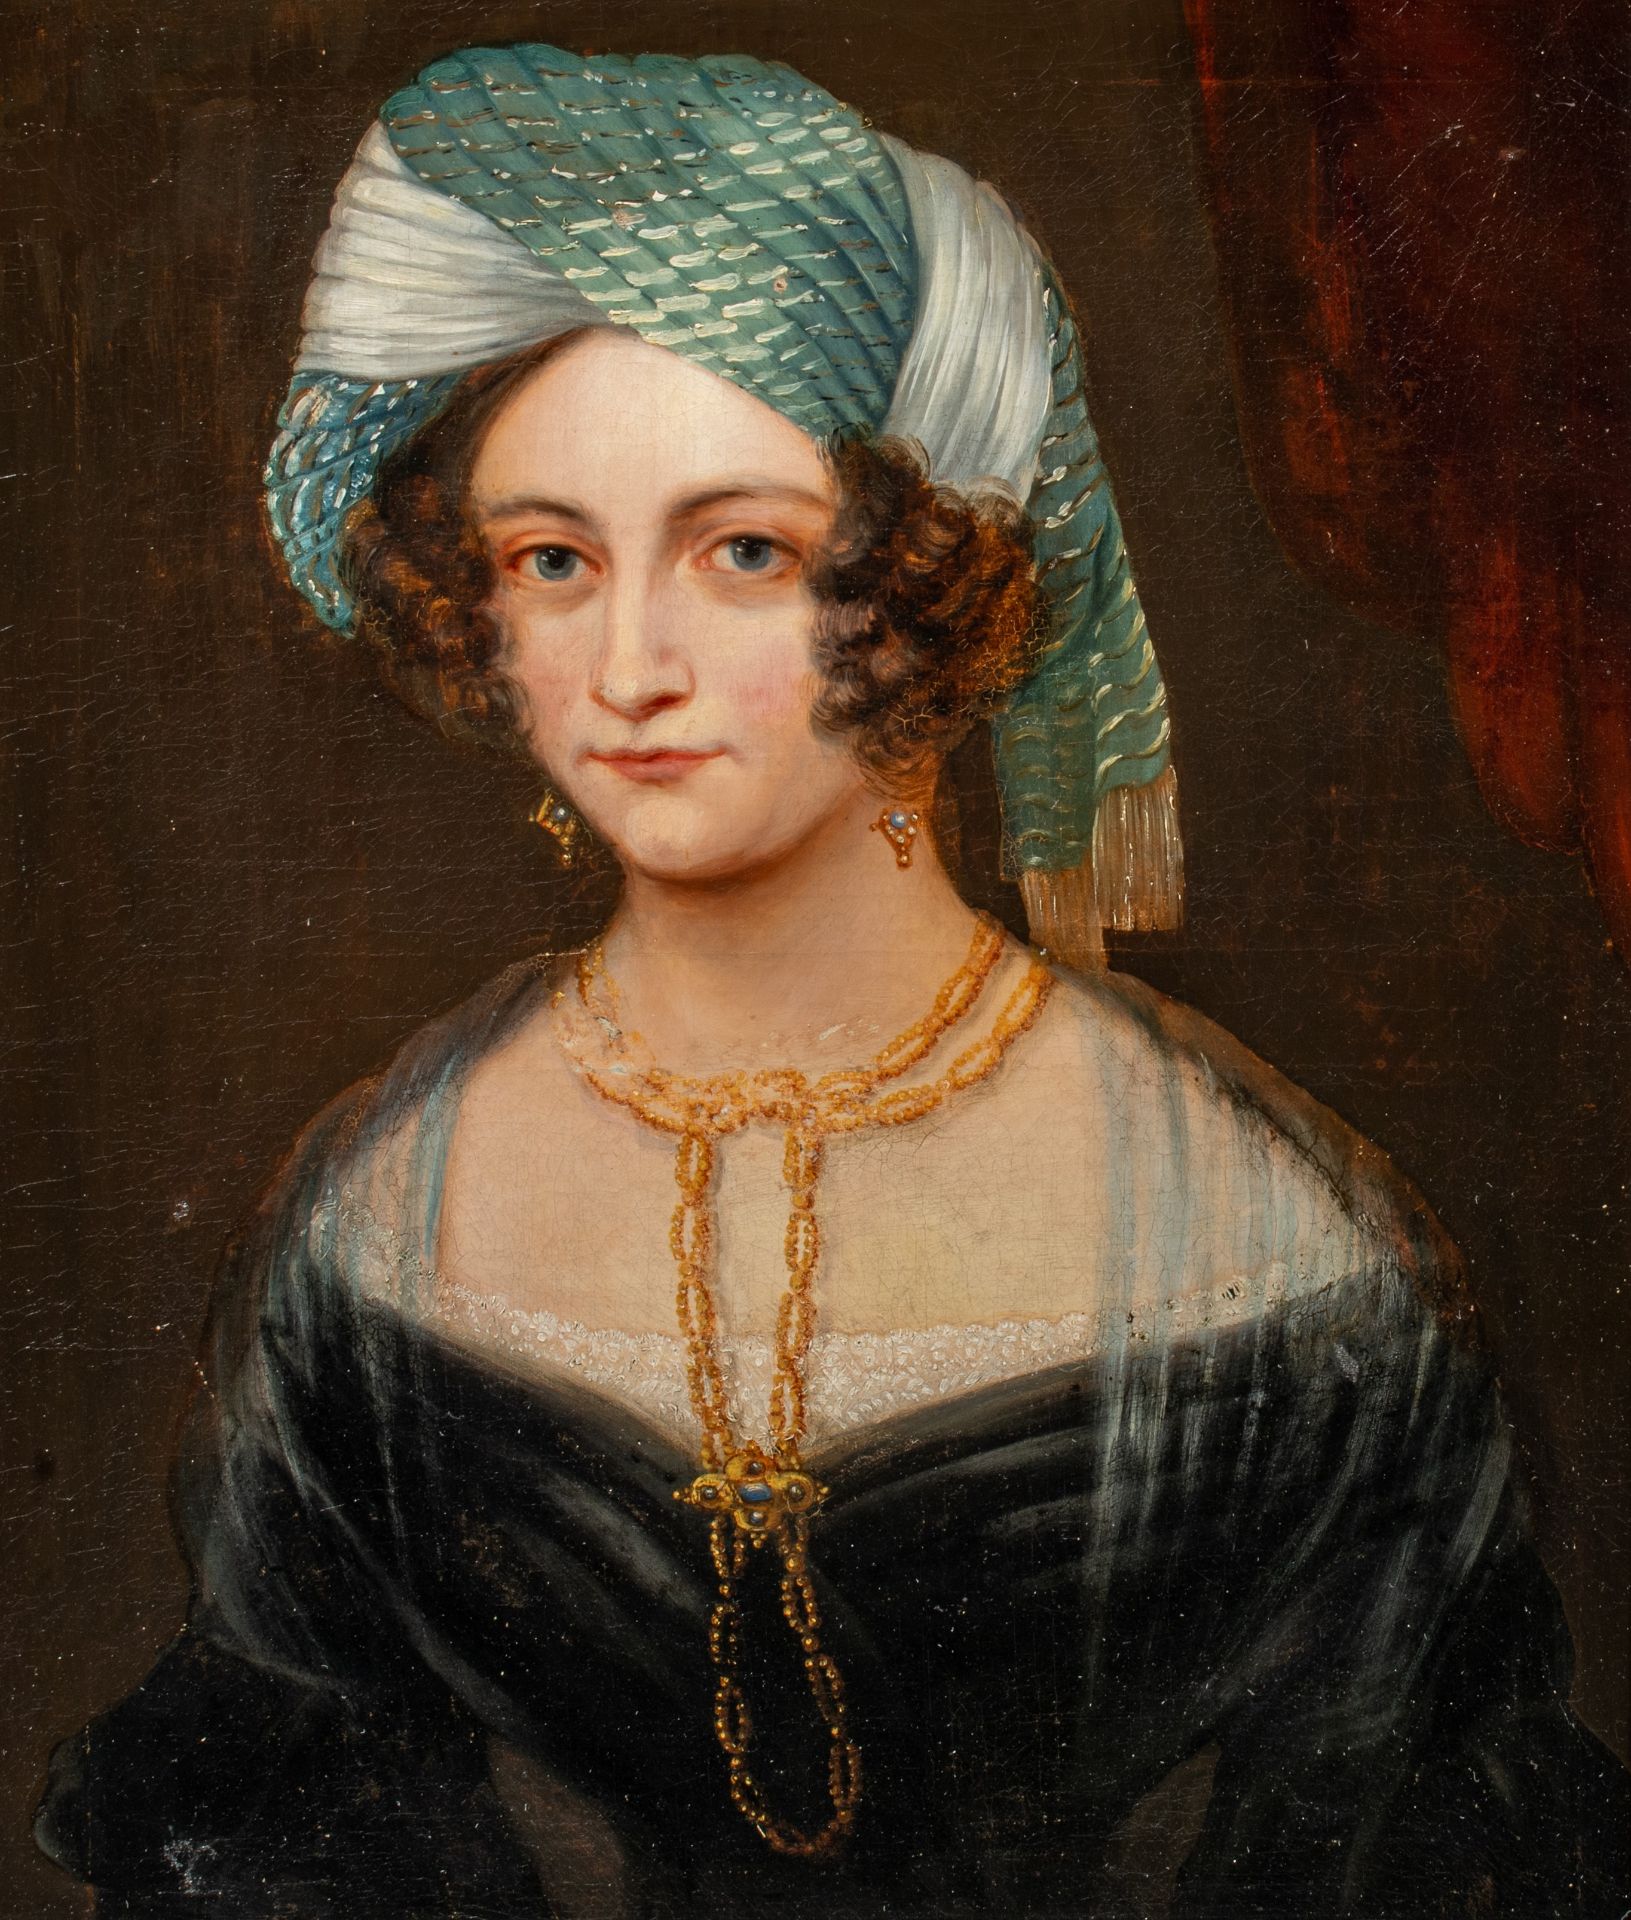 Lady with a turban, ca 1835, oil on canvas 68 x 57 cm. (26.7 x 22.4 in.)